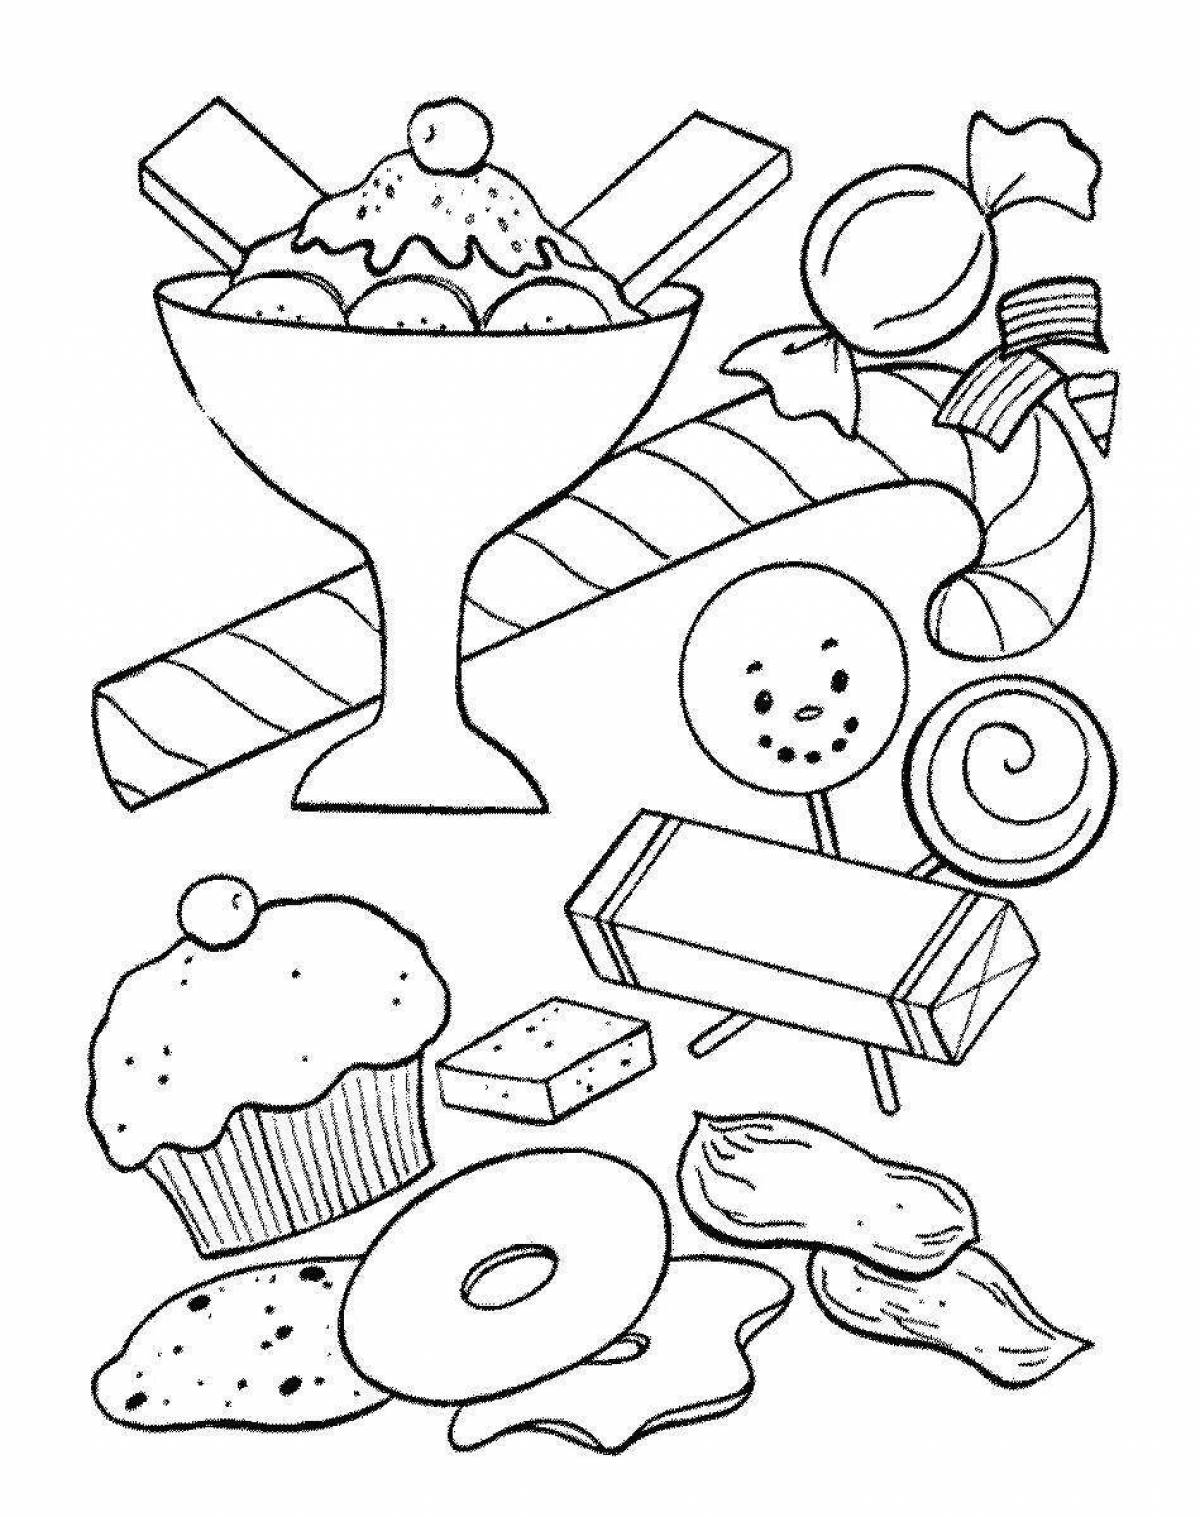 Fancy confectionery coloring book for kids